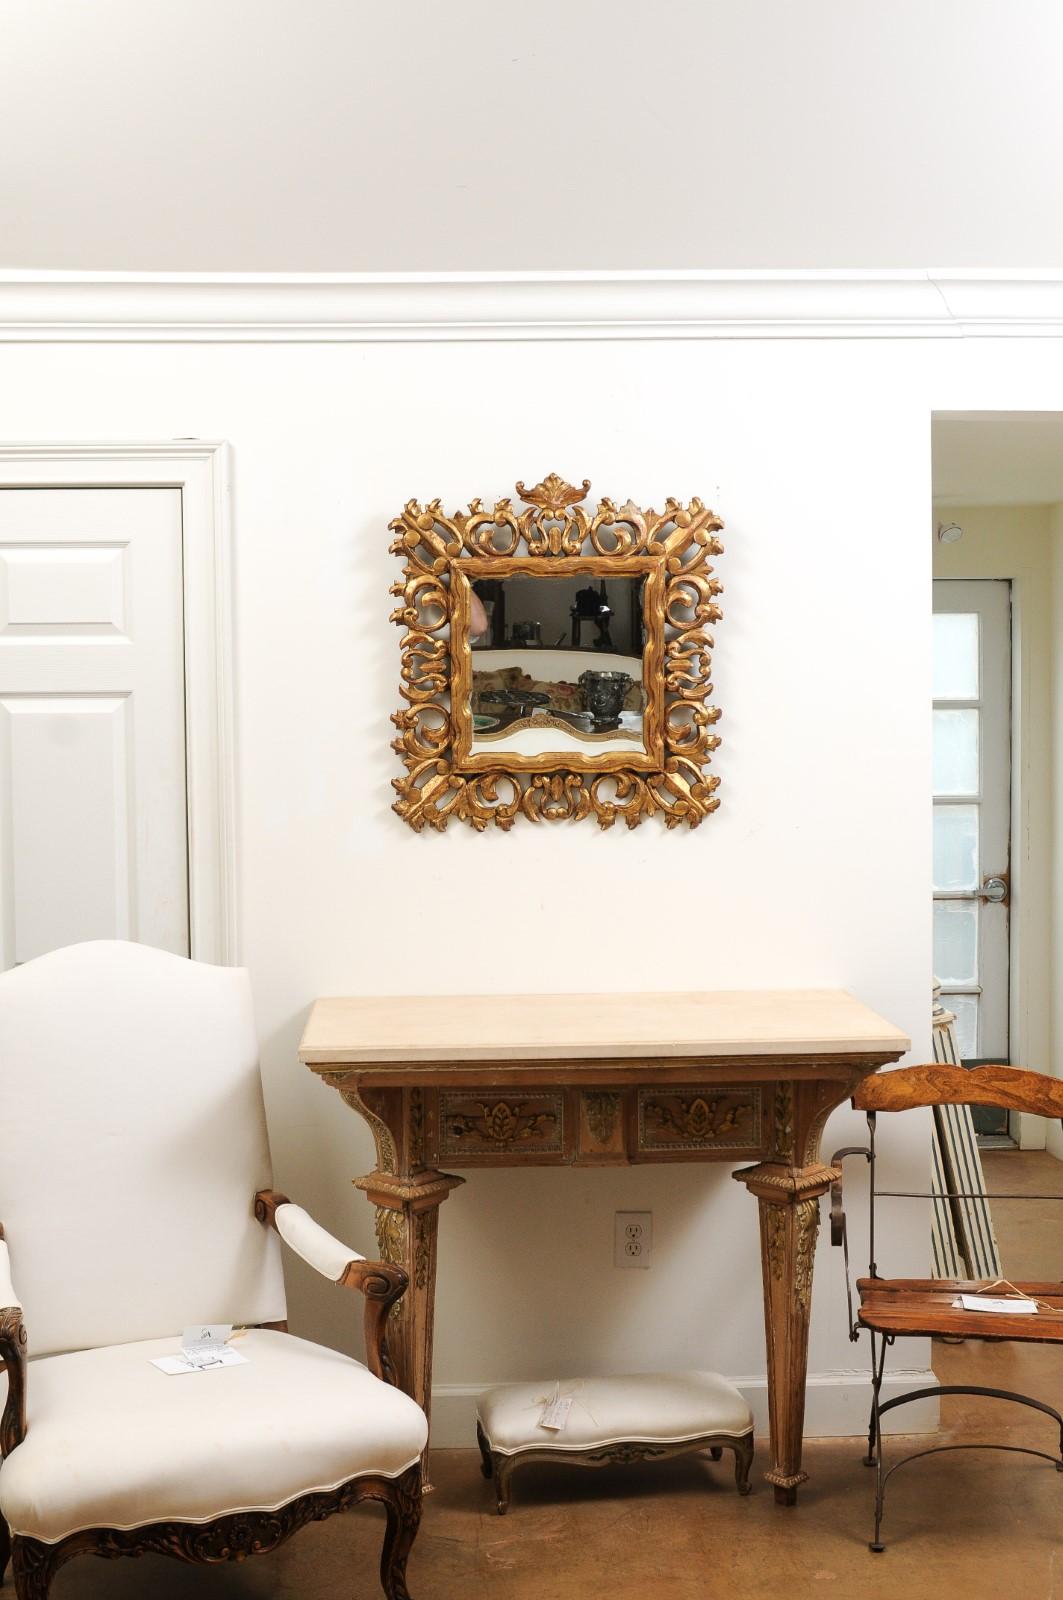 Florentine 20th Century Carved Giltwood Mirror with C-Scrolls and Foliage Motifs In Good Condition For Sale In Atlanta, GA